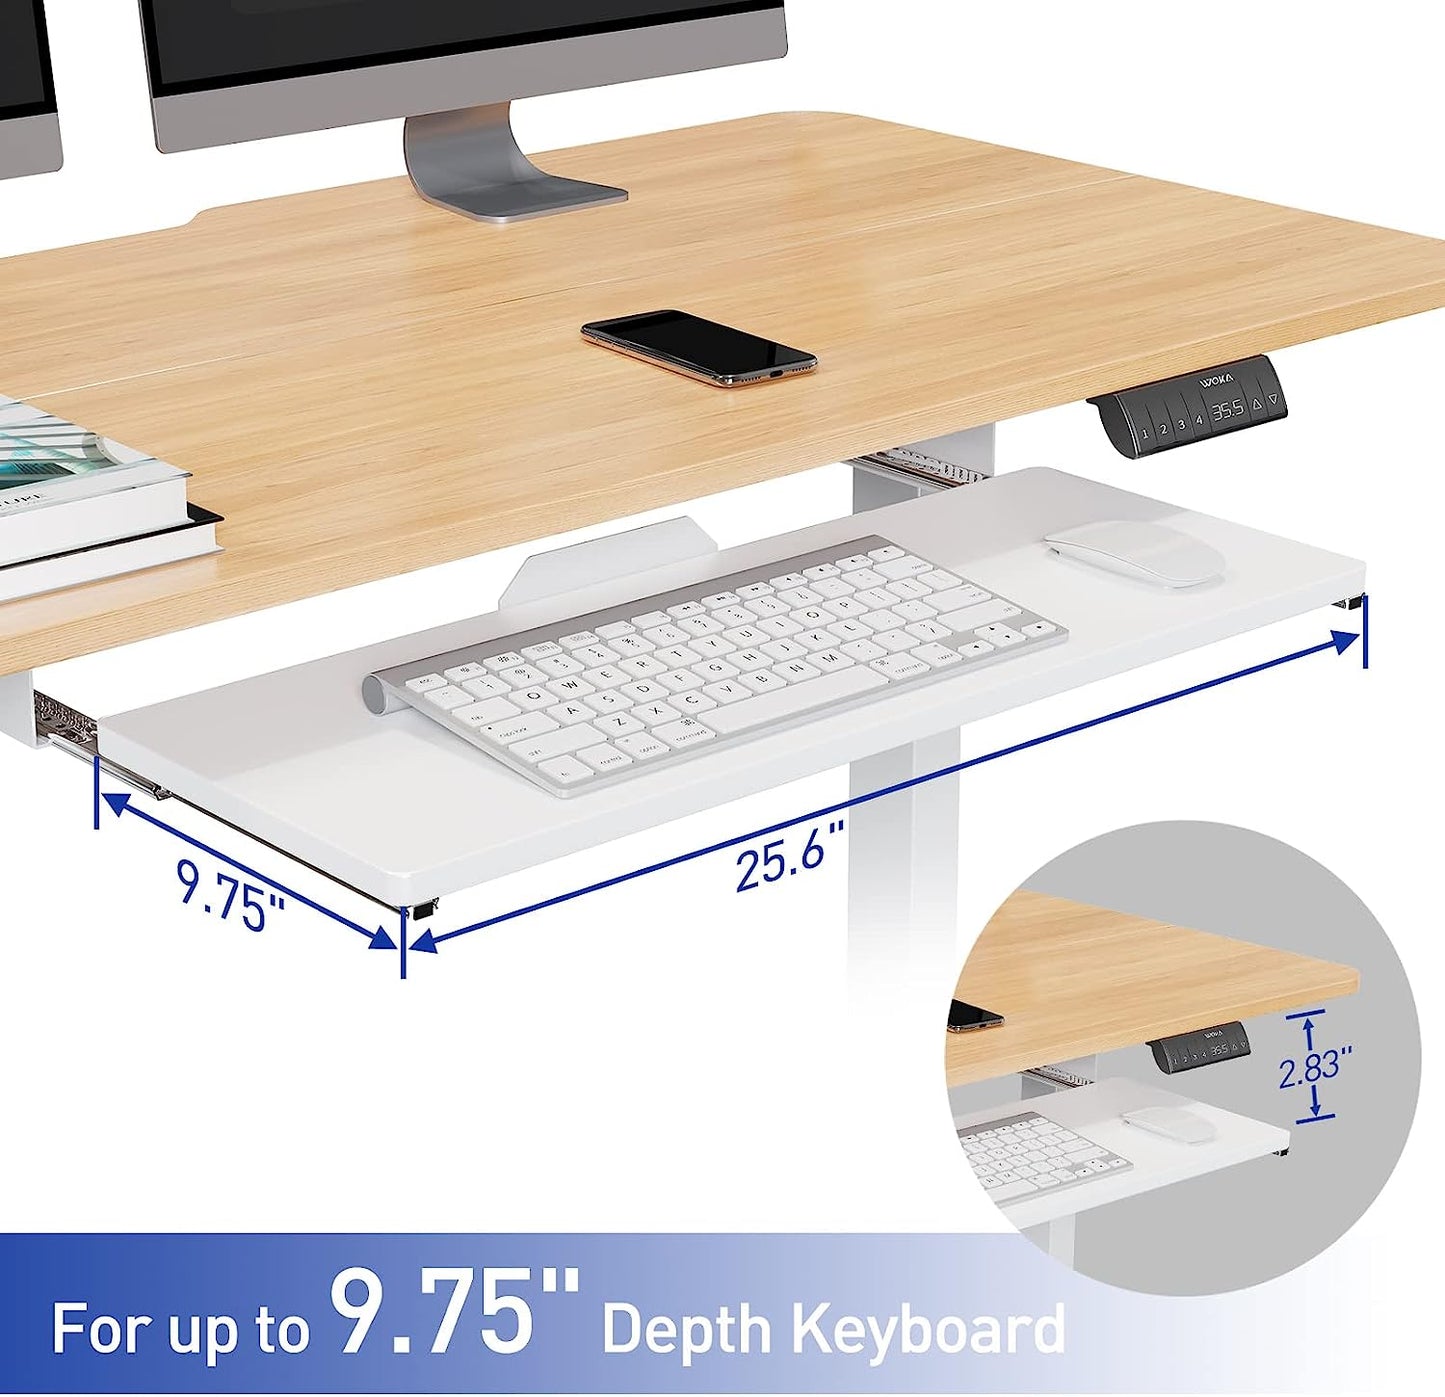 WOKA Electric Standing Desk Adjustable Height, 48 x 24 Inches Stand up Desk with Keyboard Tray, Sit Stand Desk with Memory Controller for Home Office, Motorized Desk with Splice Board, Oak